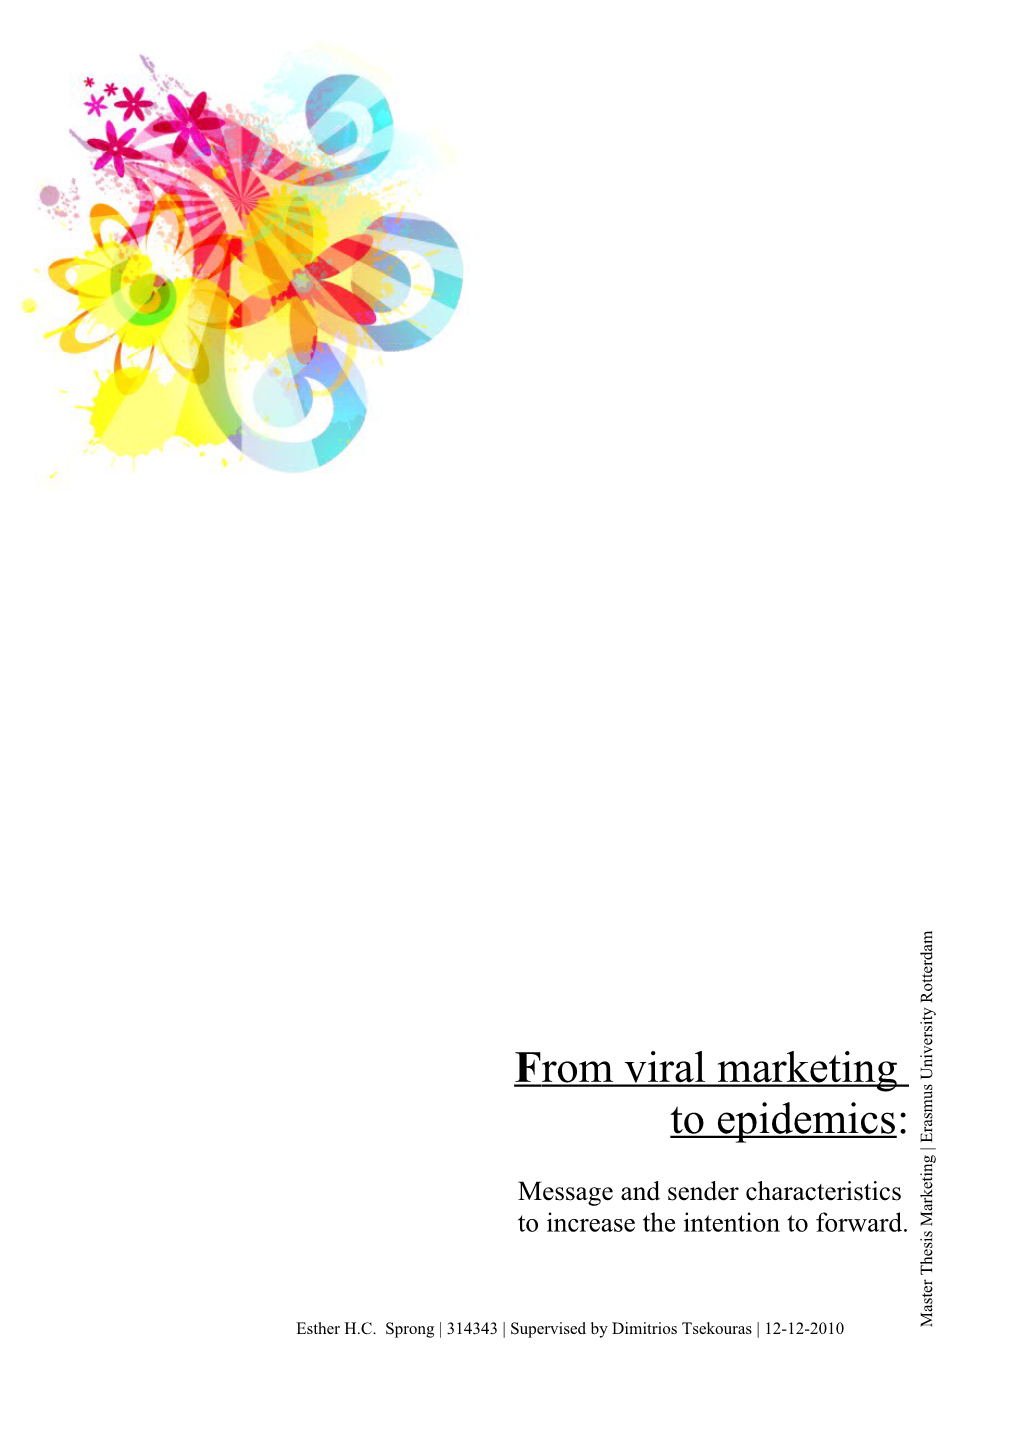 Viral Marketing Is a Relatively New Tool in the Marketing Communication Toolbox and Has